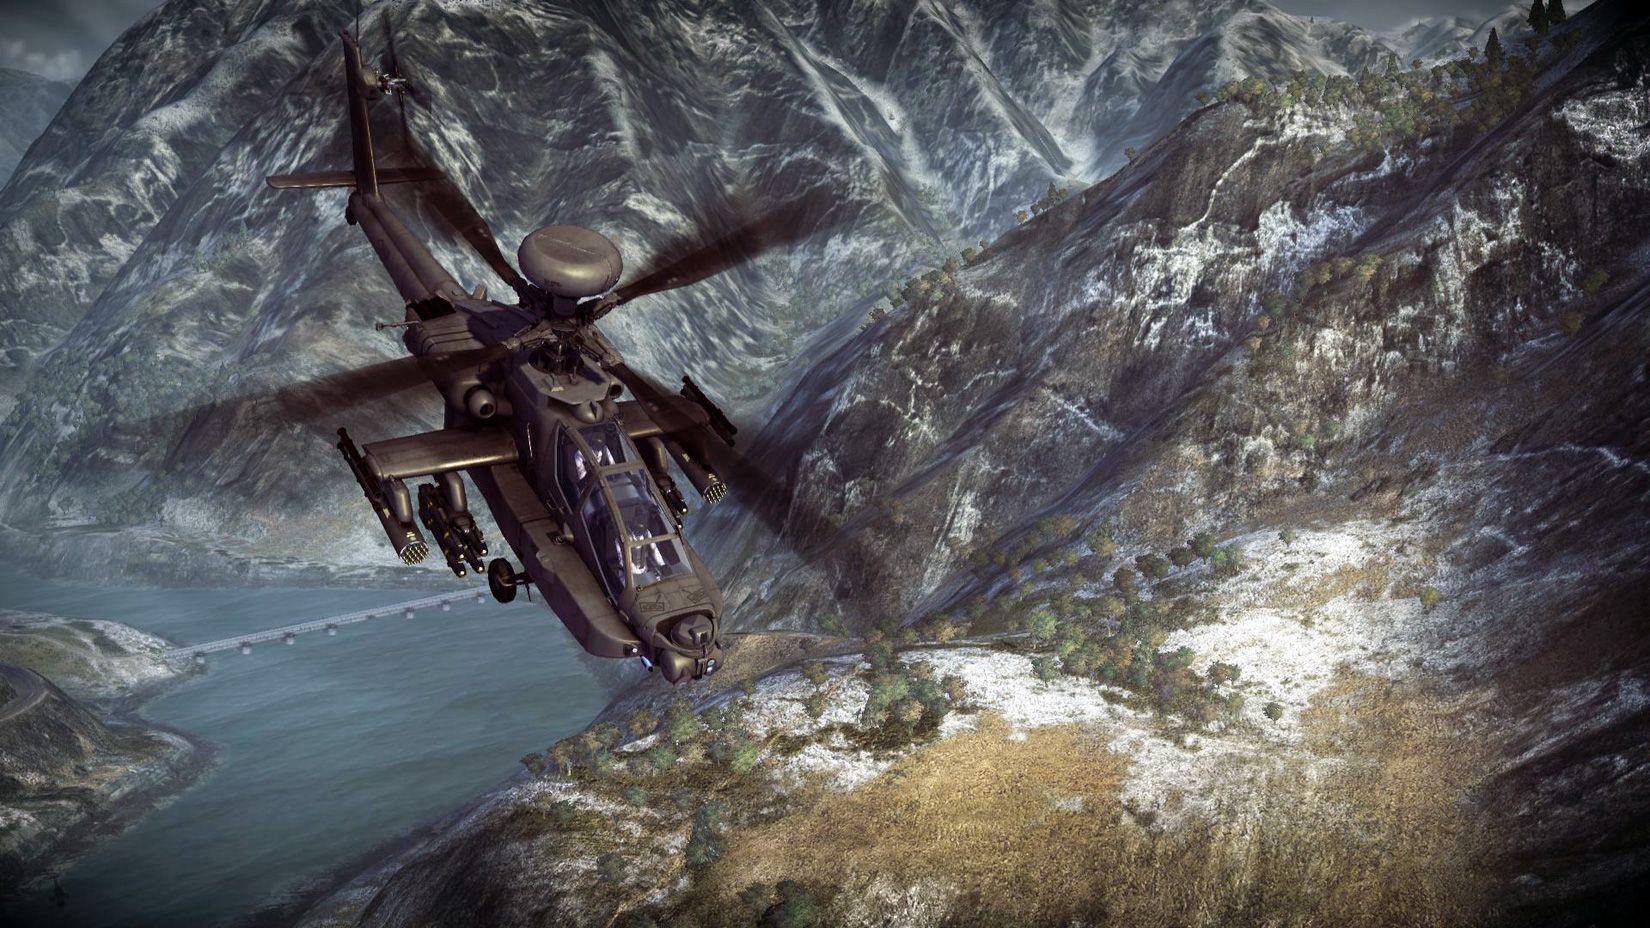 Apache Helicopter Wallpaper Aircraft 2850 HD Picture. Top